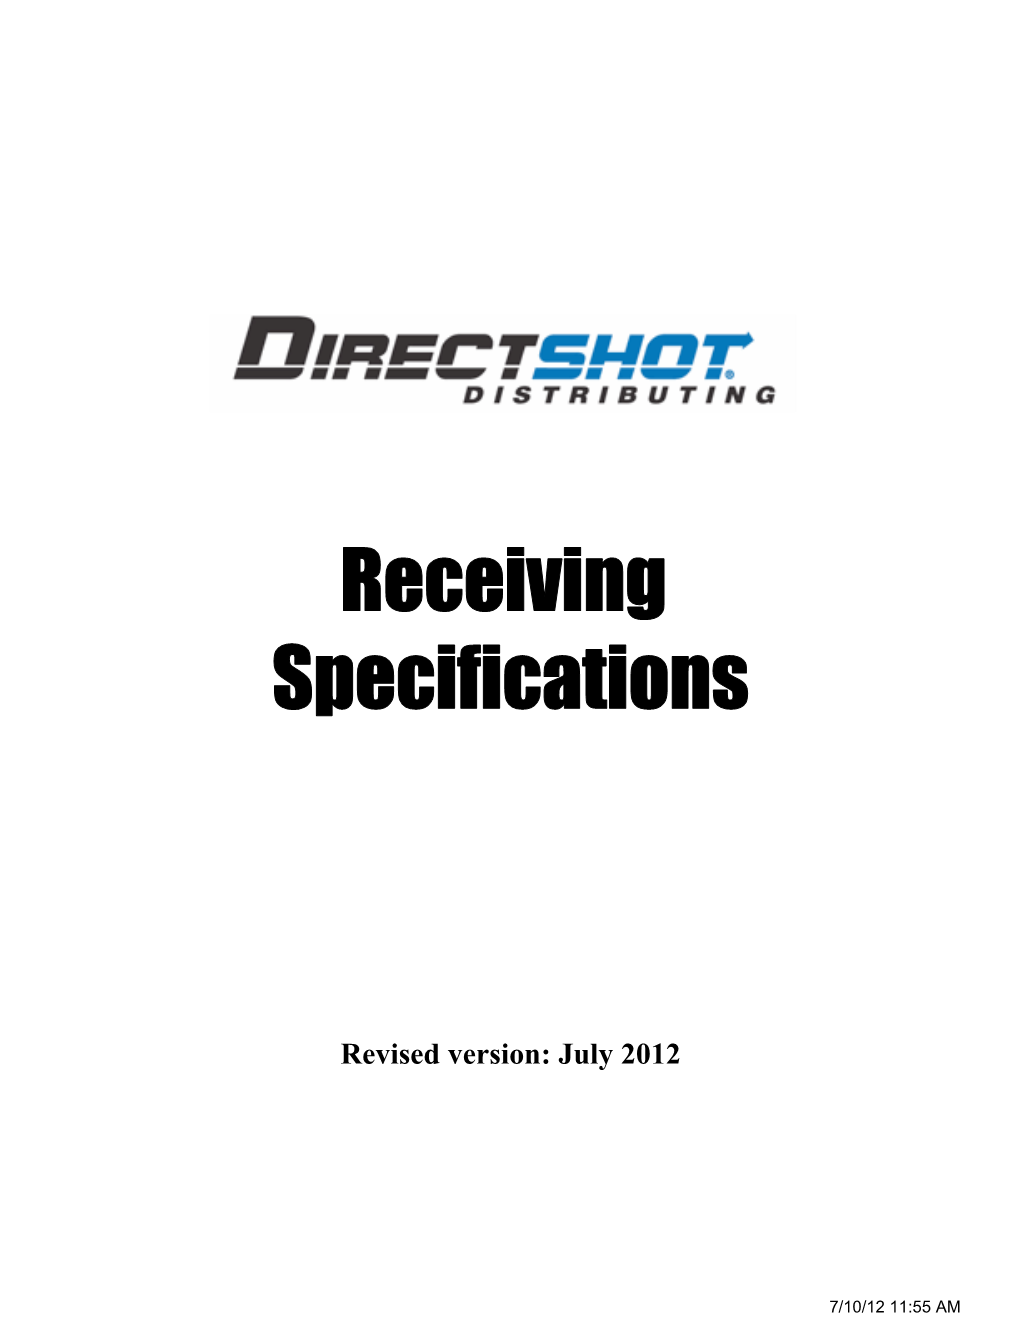 Direct Shot Distributing Distribution Receiving Specifications